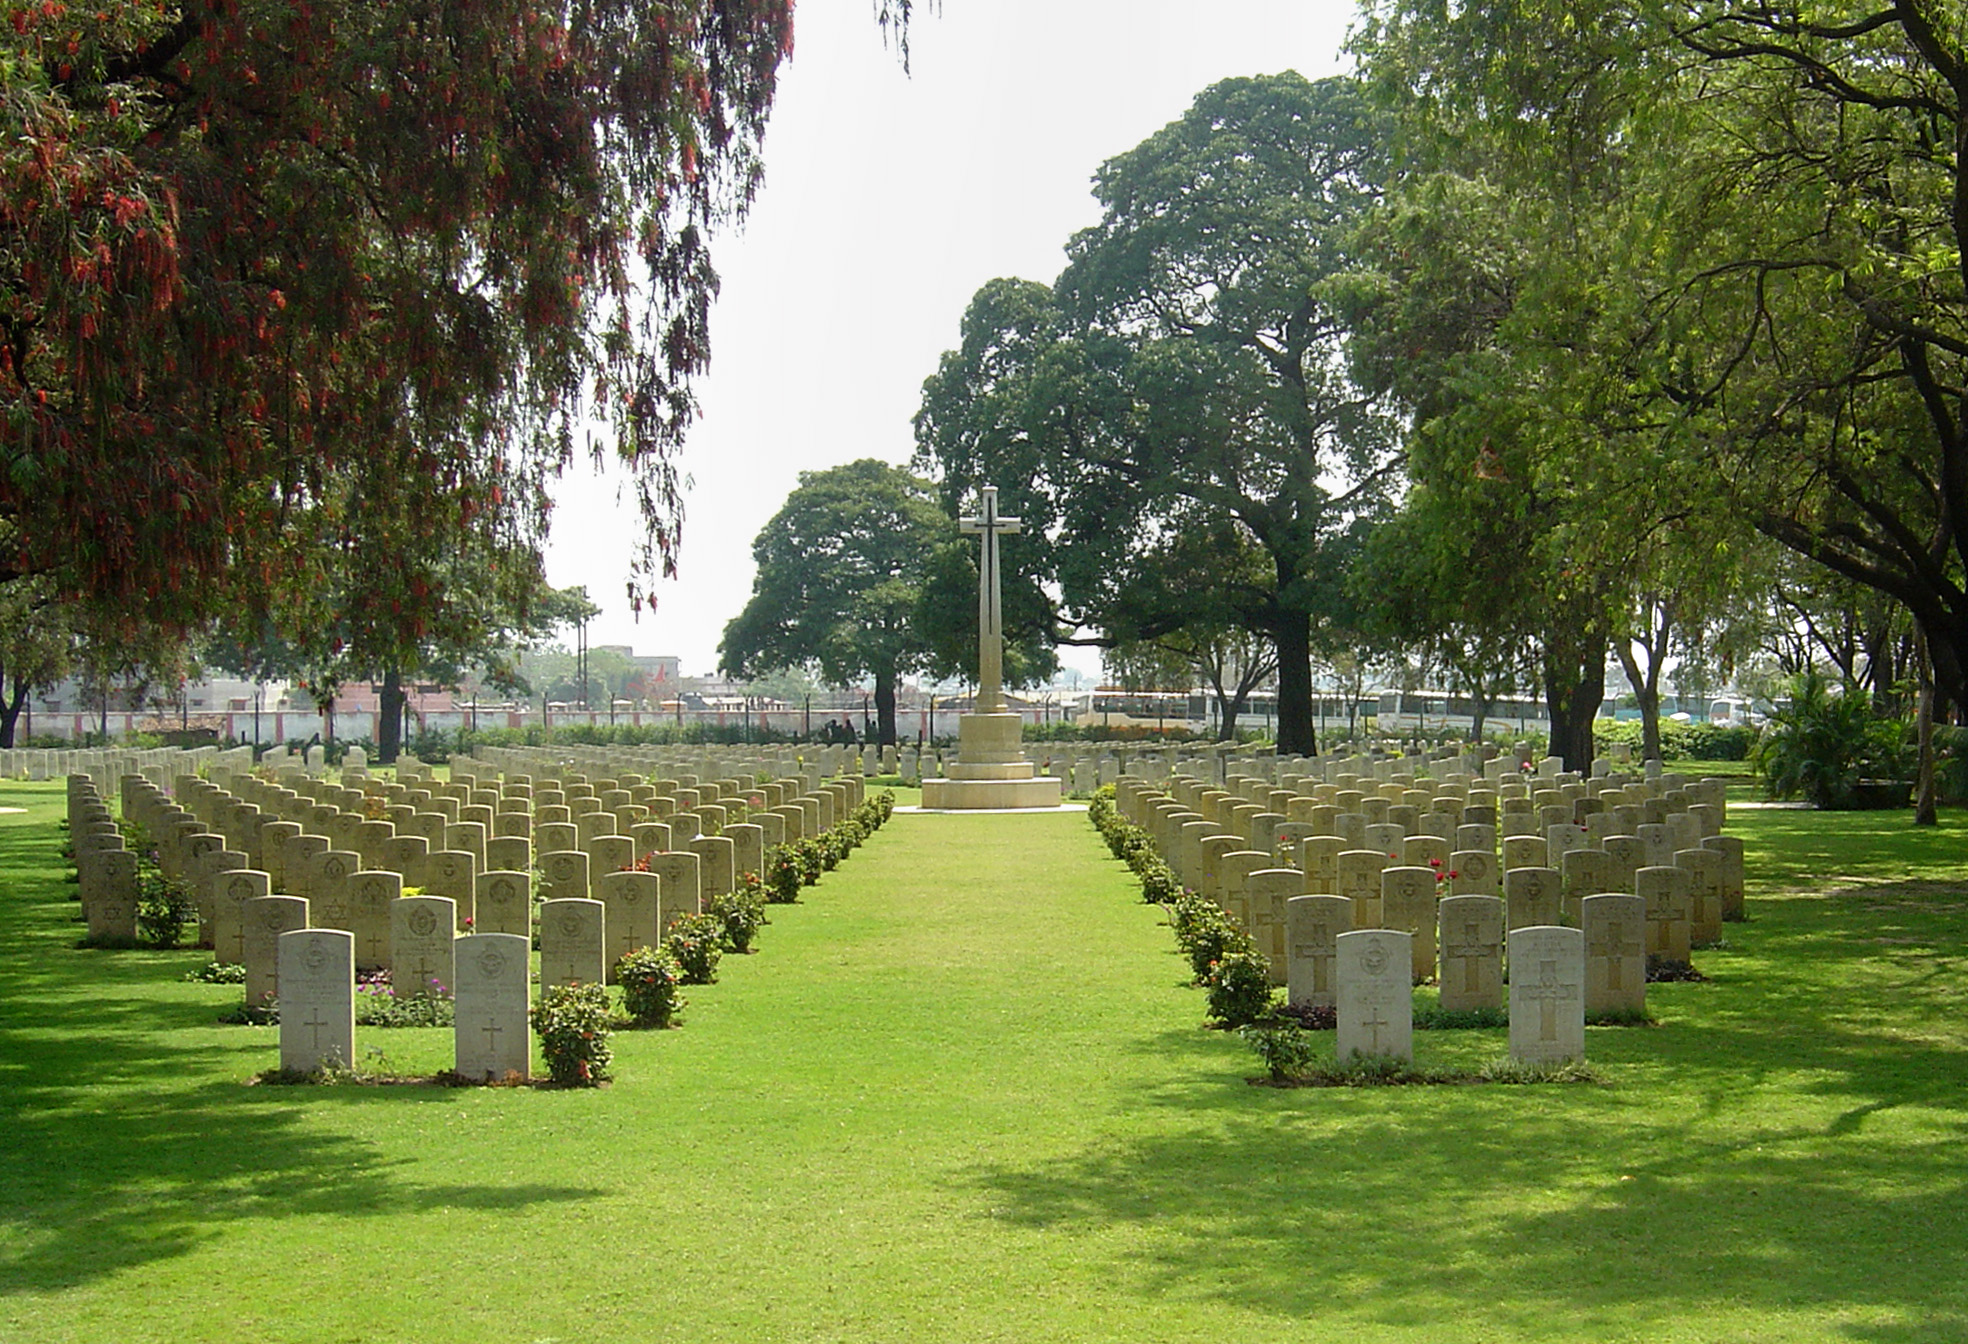 rows of graves with a wide expanse of grass between the 2 blocks of gravestones leads to the white cross of sacrifice at the far end of the cemetery. Several trees surround the cemetery